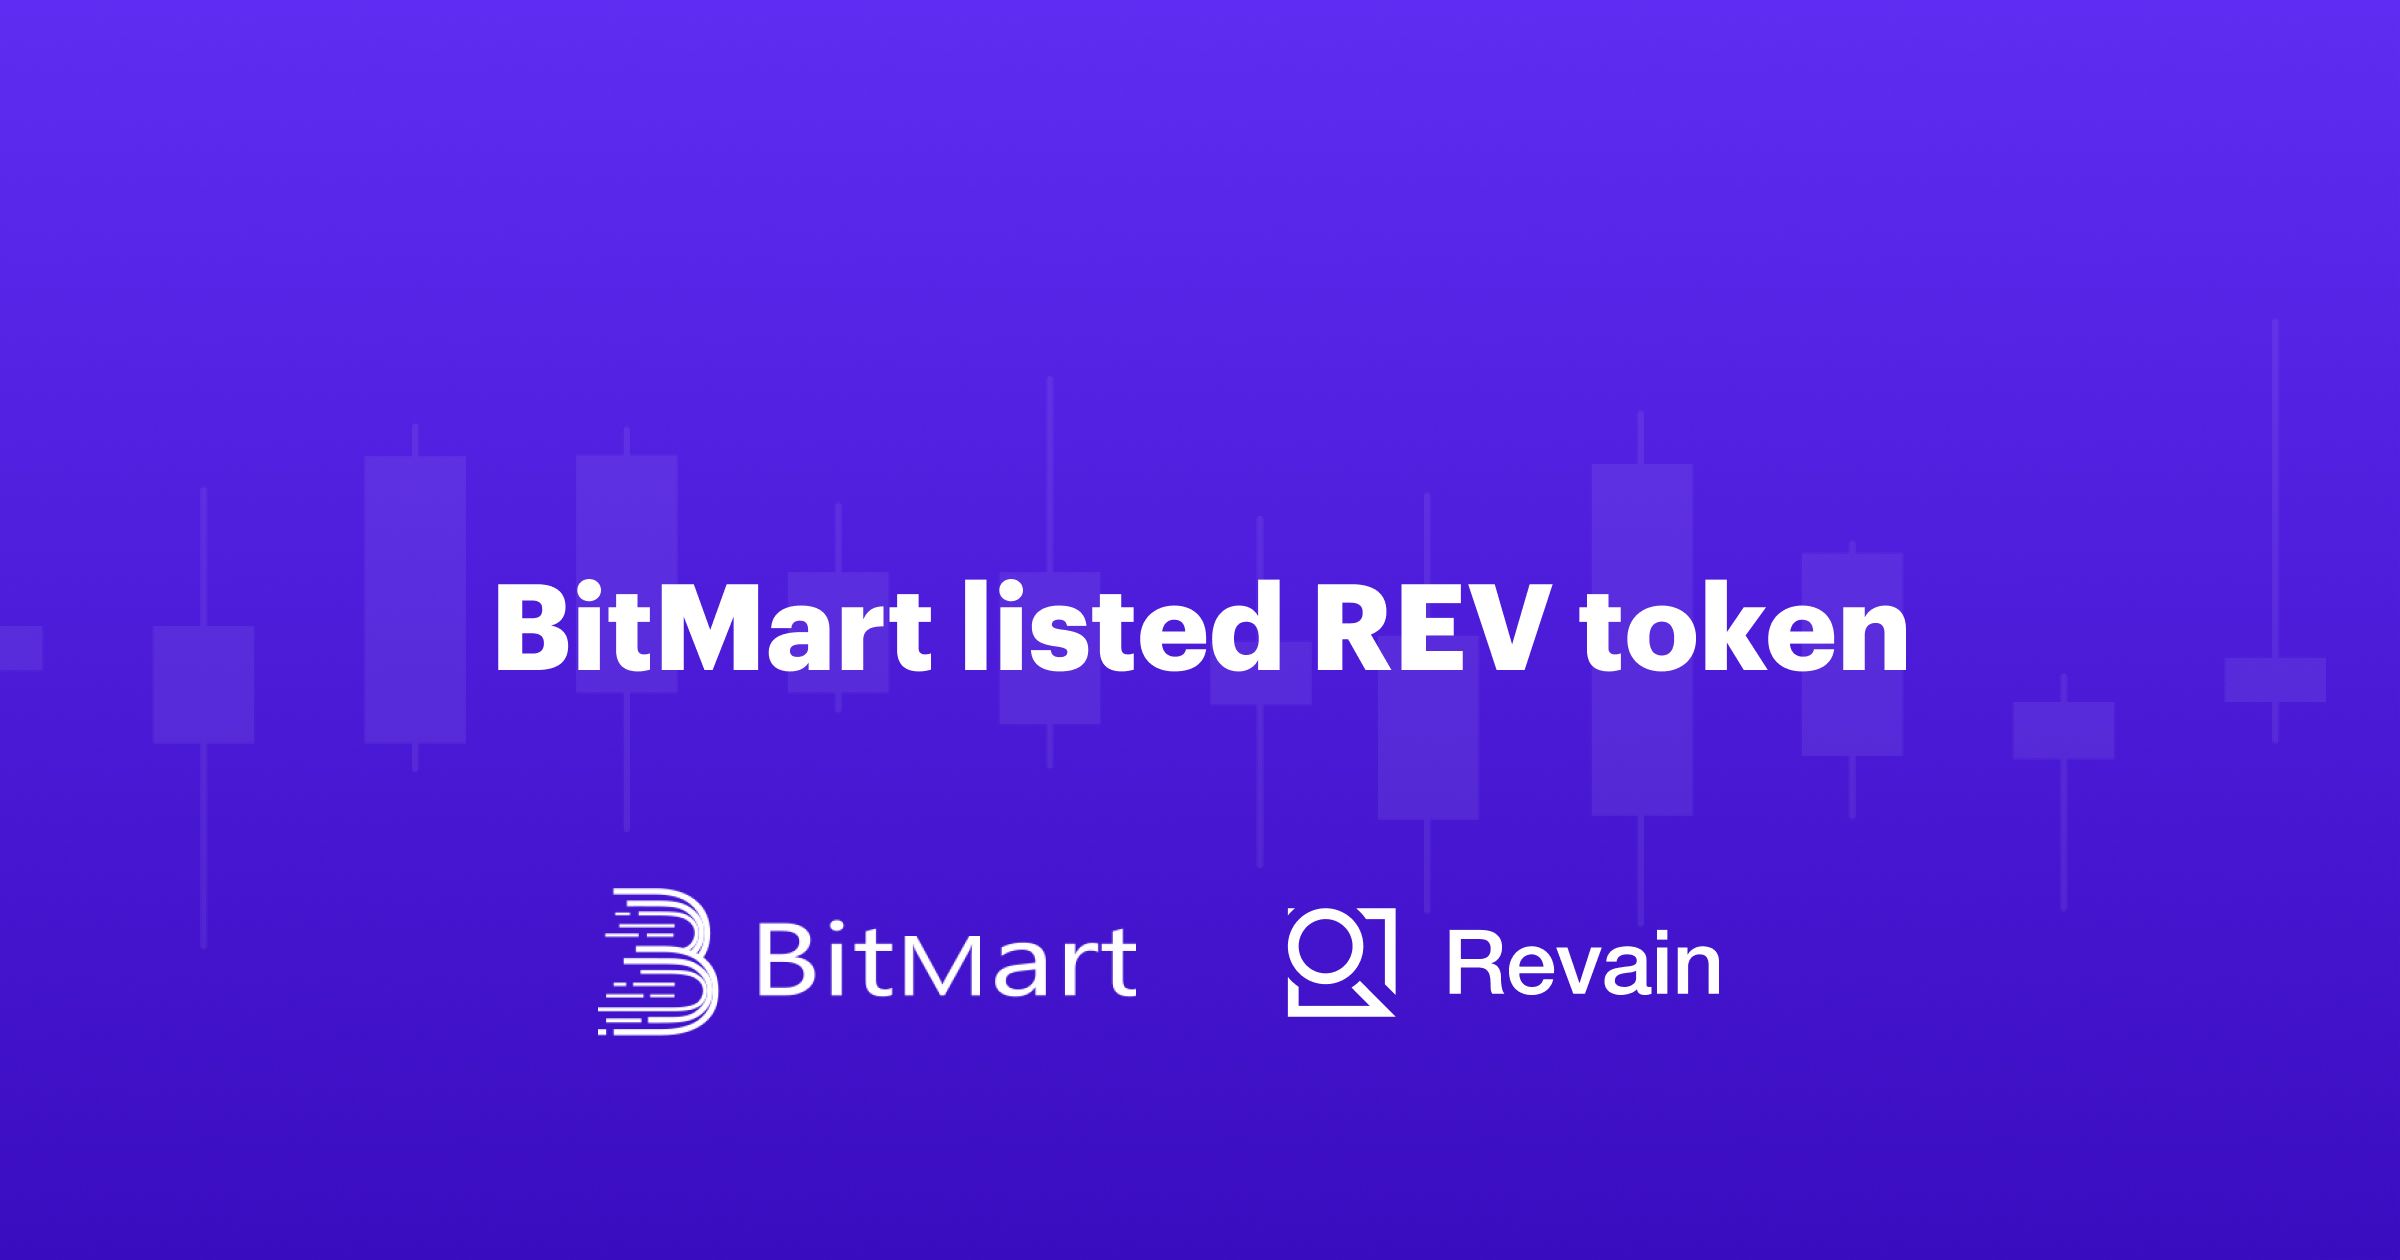 Article Revain is listed on the BitMart exchange